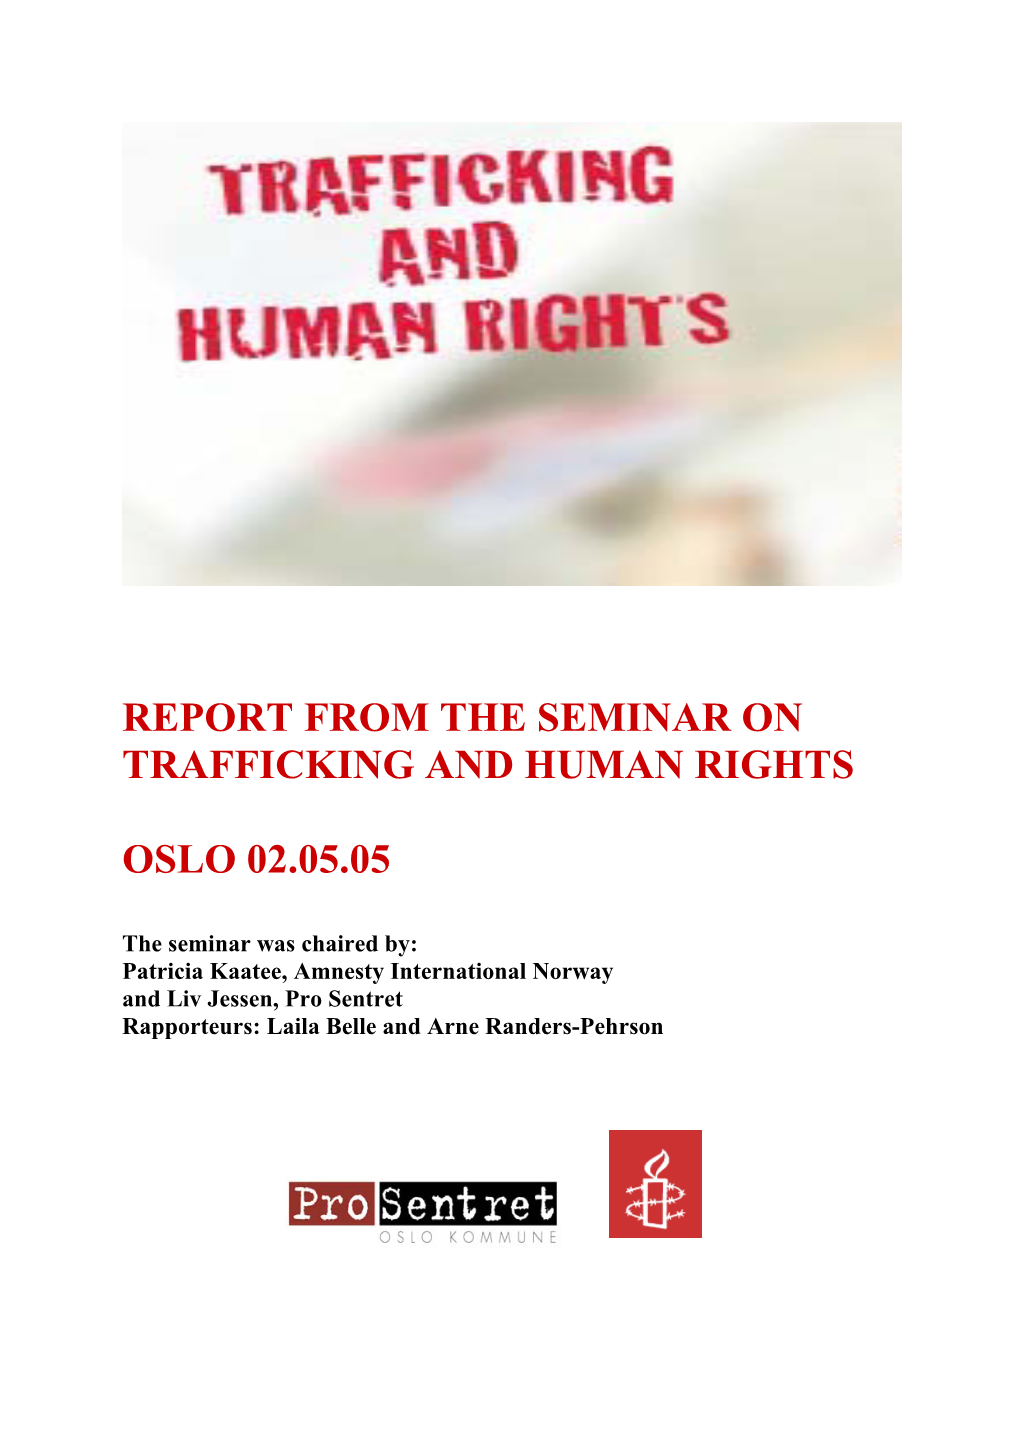 Seminar on Trafficking and Human Rights, in Oslo 02